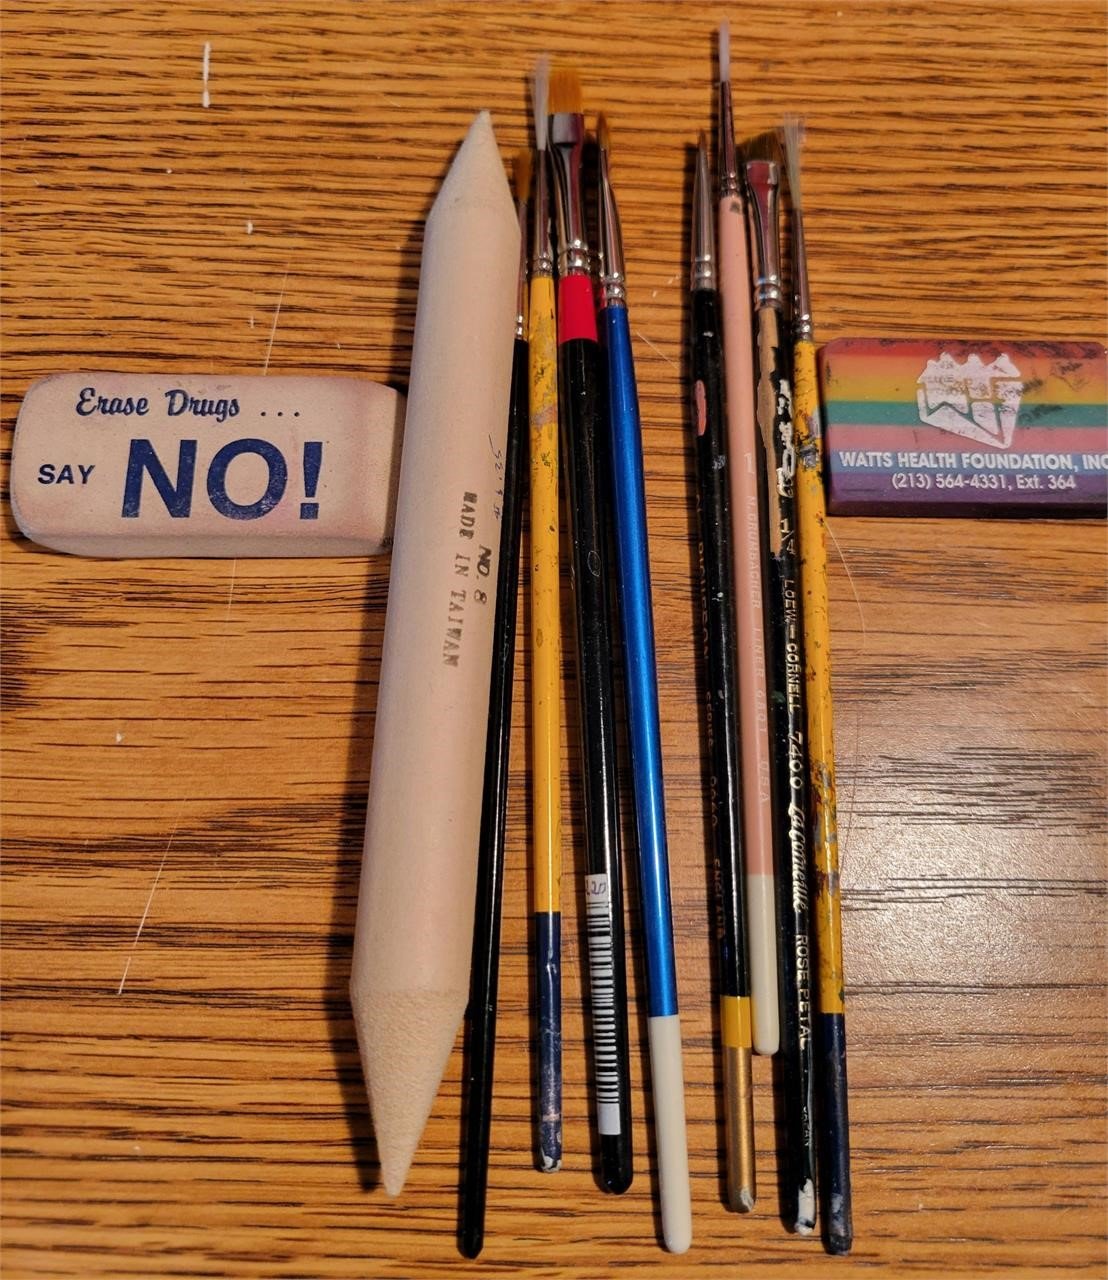 Paintbrushes Most NEW and 2 erasers